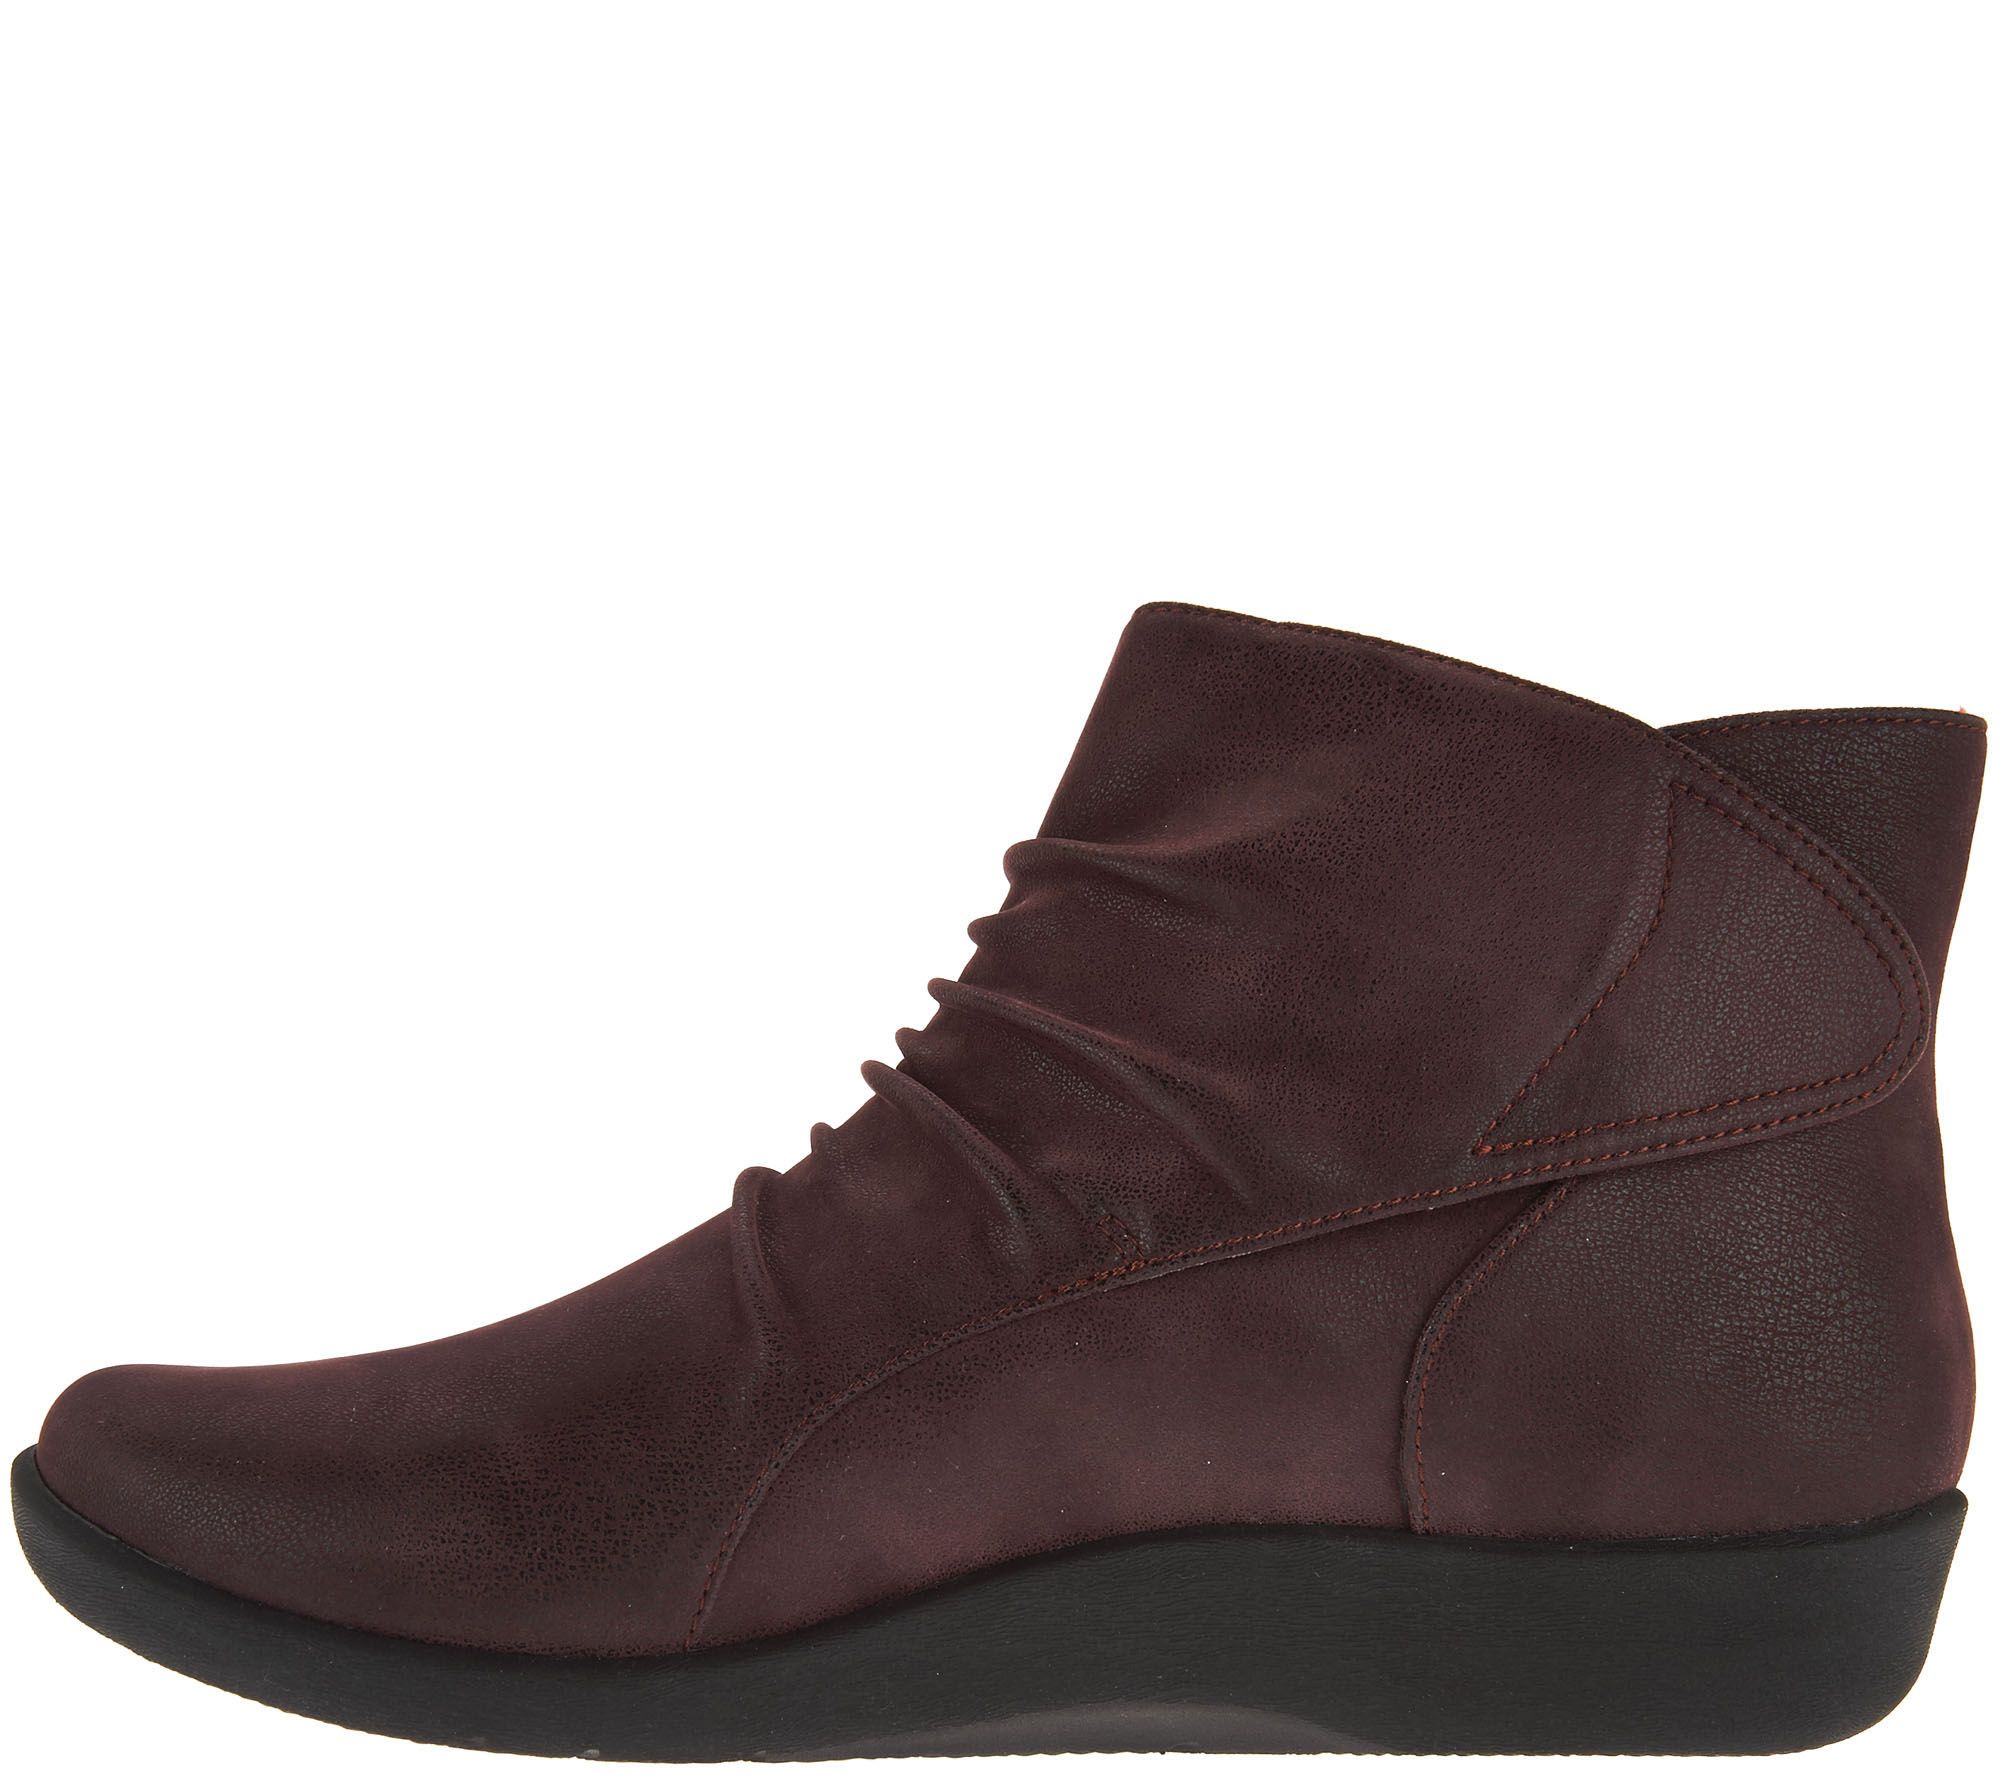 CLOUDSTEPPERS by Clarks Ruched Ankle Boots - Sillian Sway - QVC.com